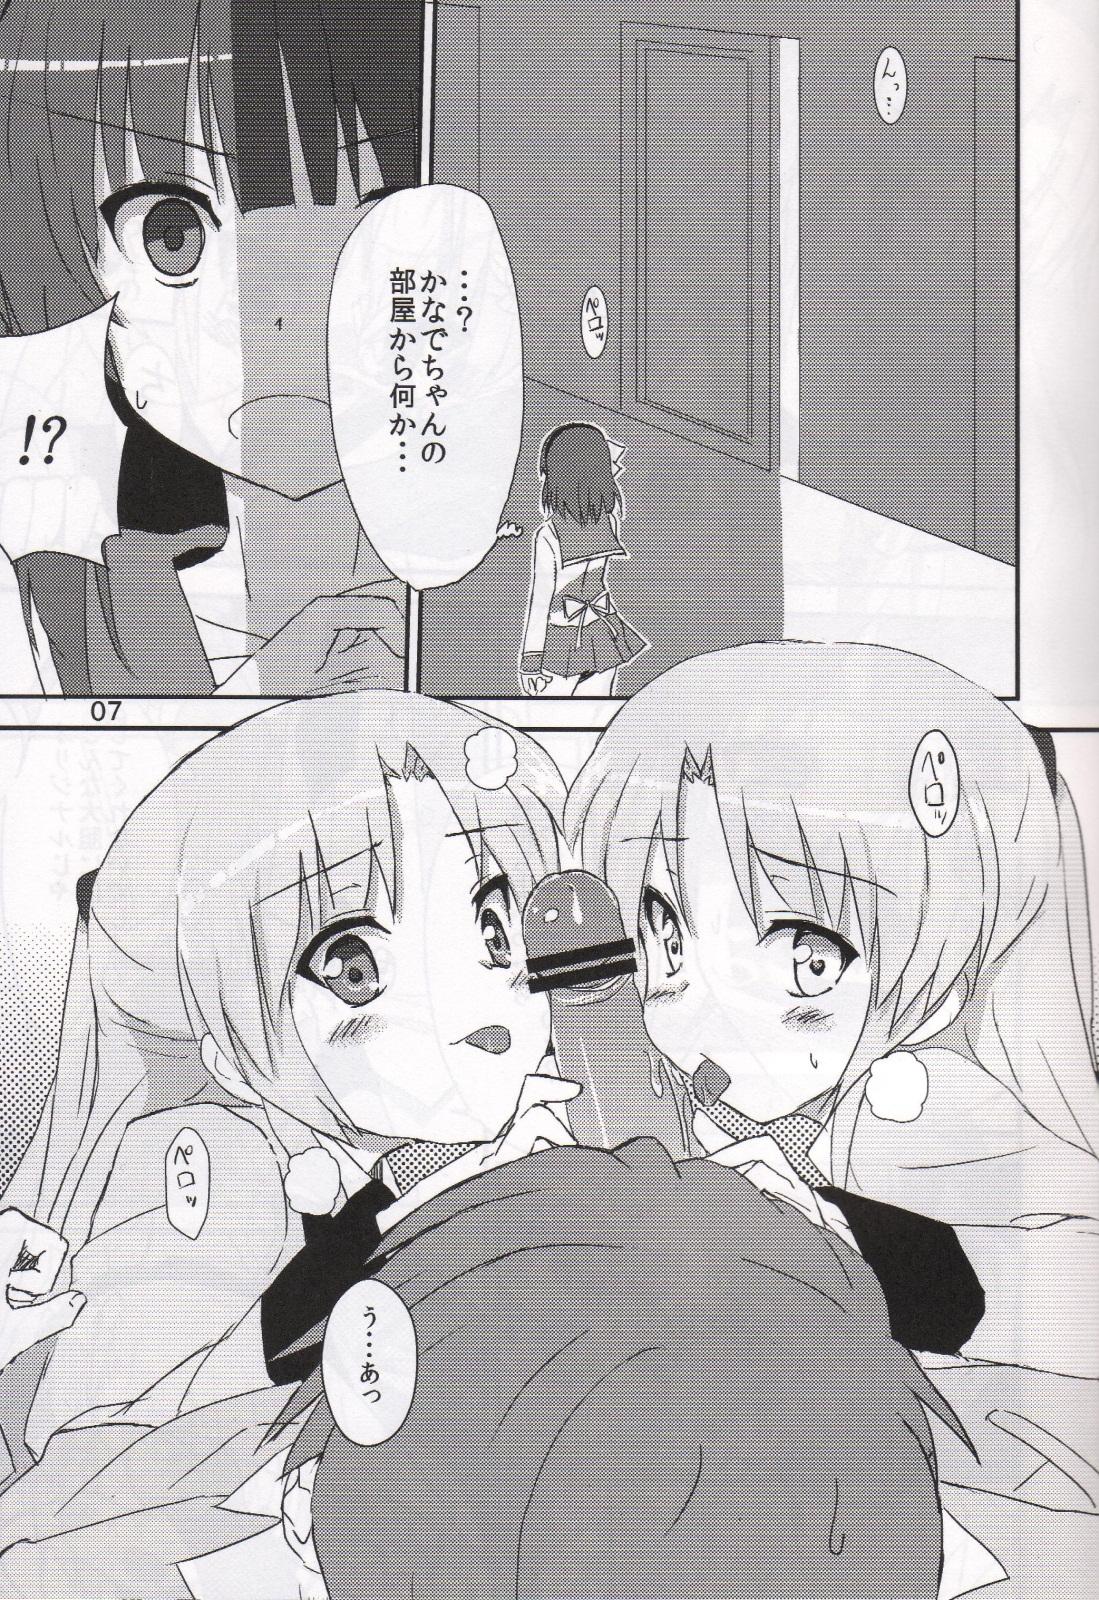 Dildo My Heart is yours! ver.2♪ - Angel beats Furry - Page 6